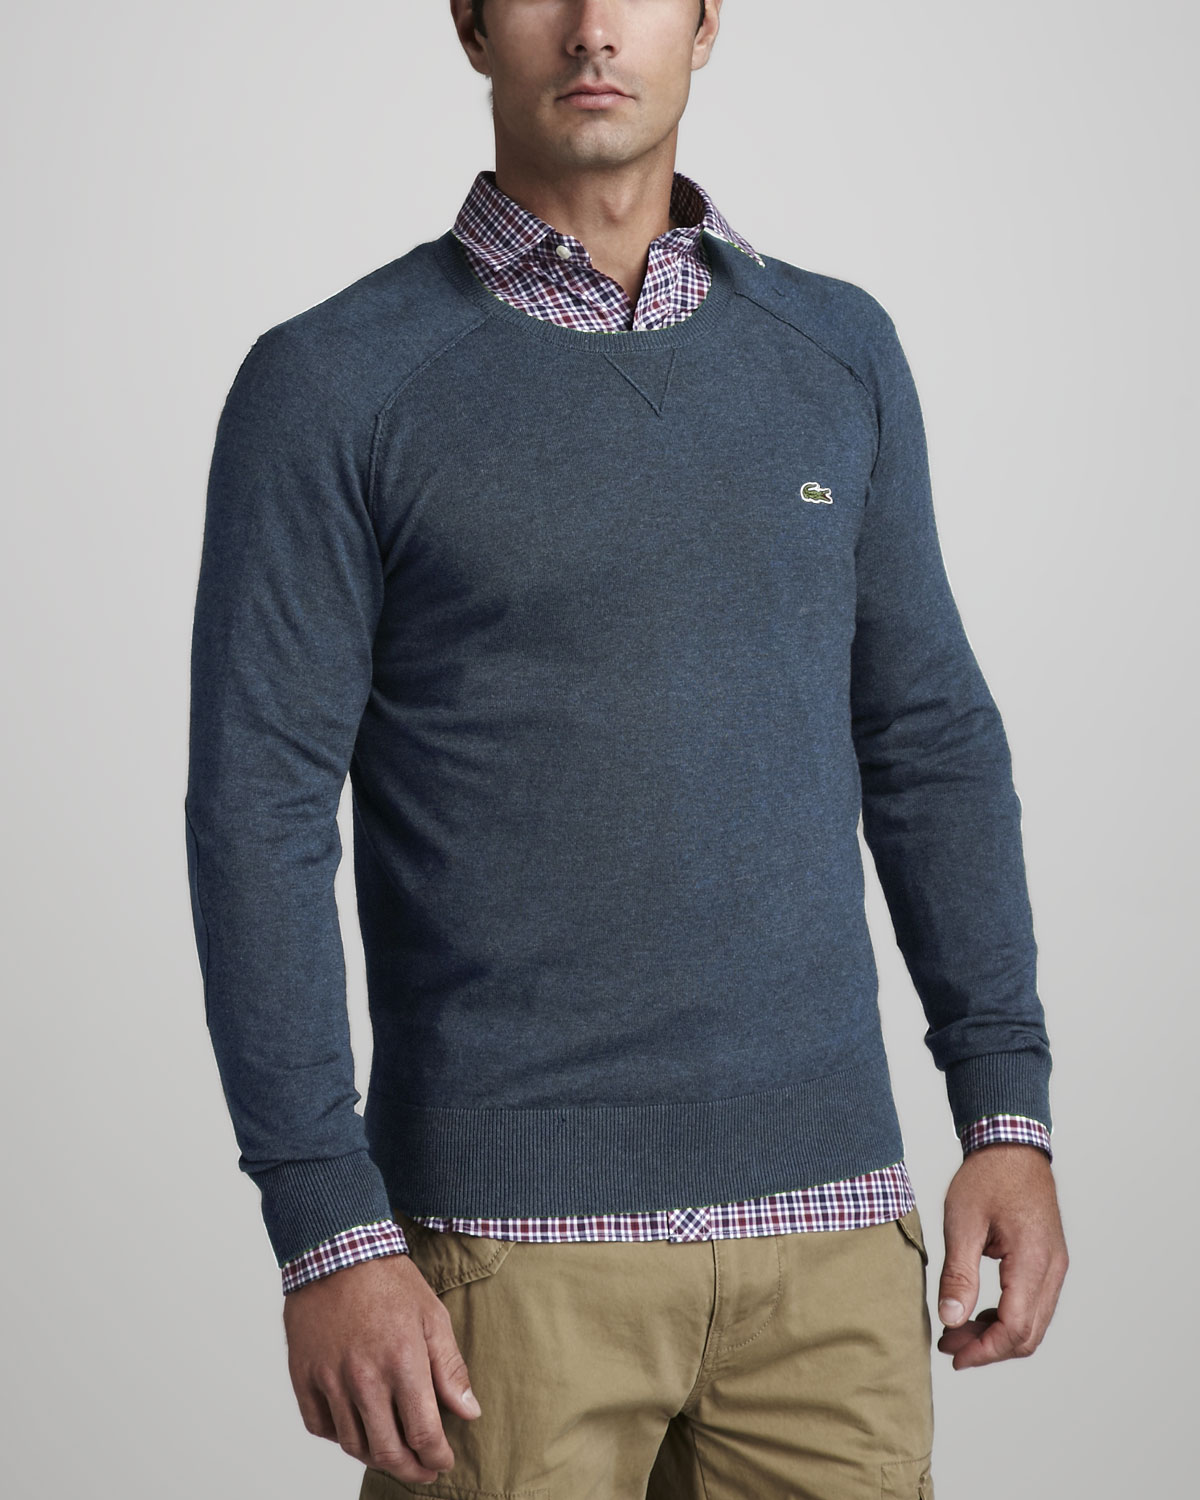 Lyst - Lacoste Suede Patch Sweater in Gray for Men